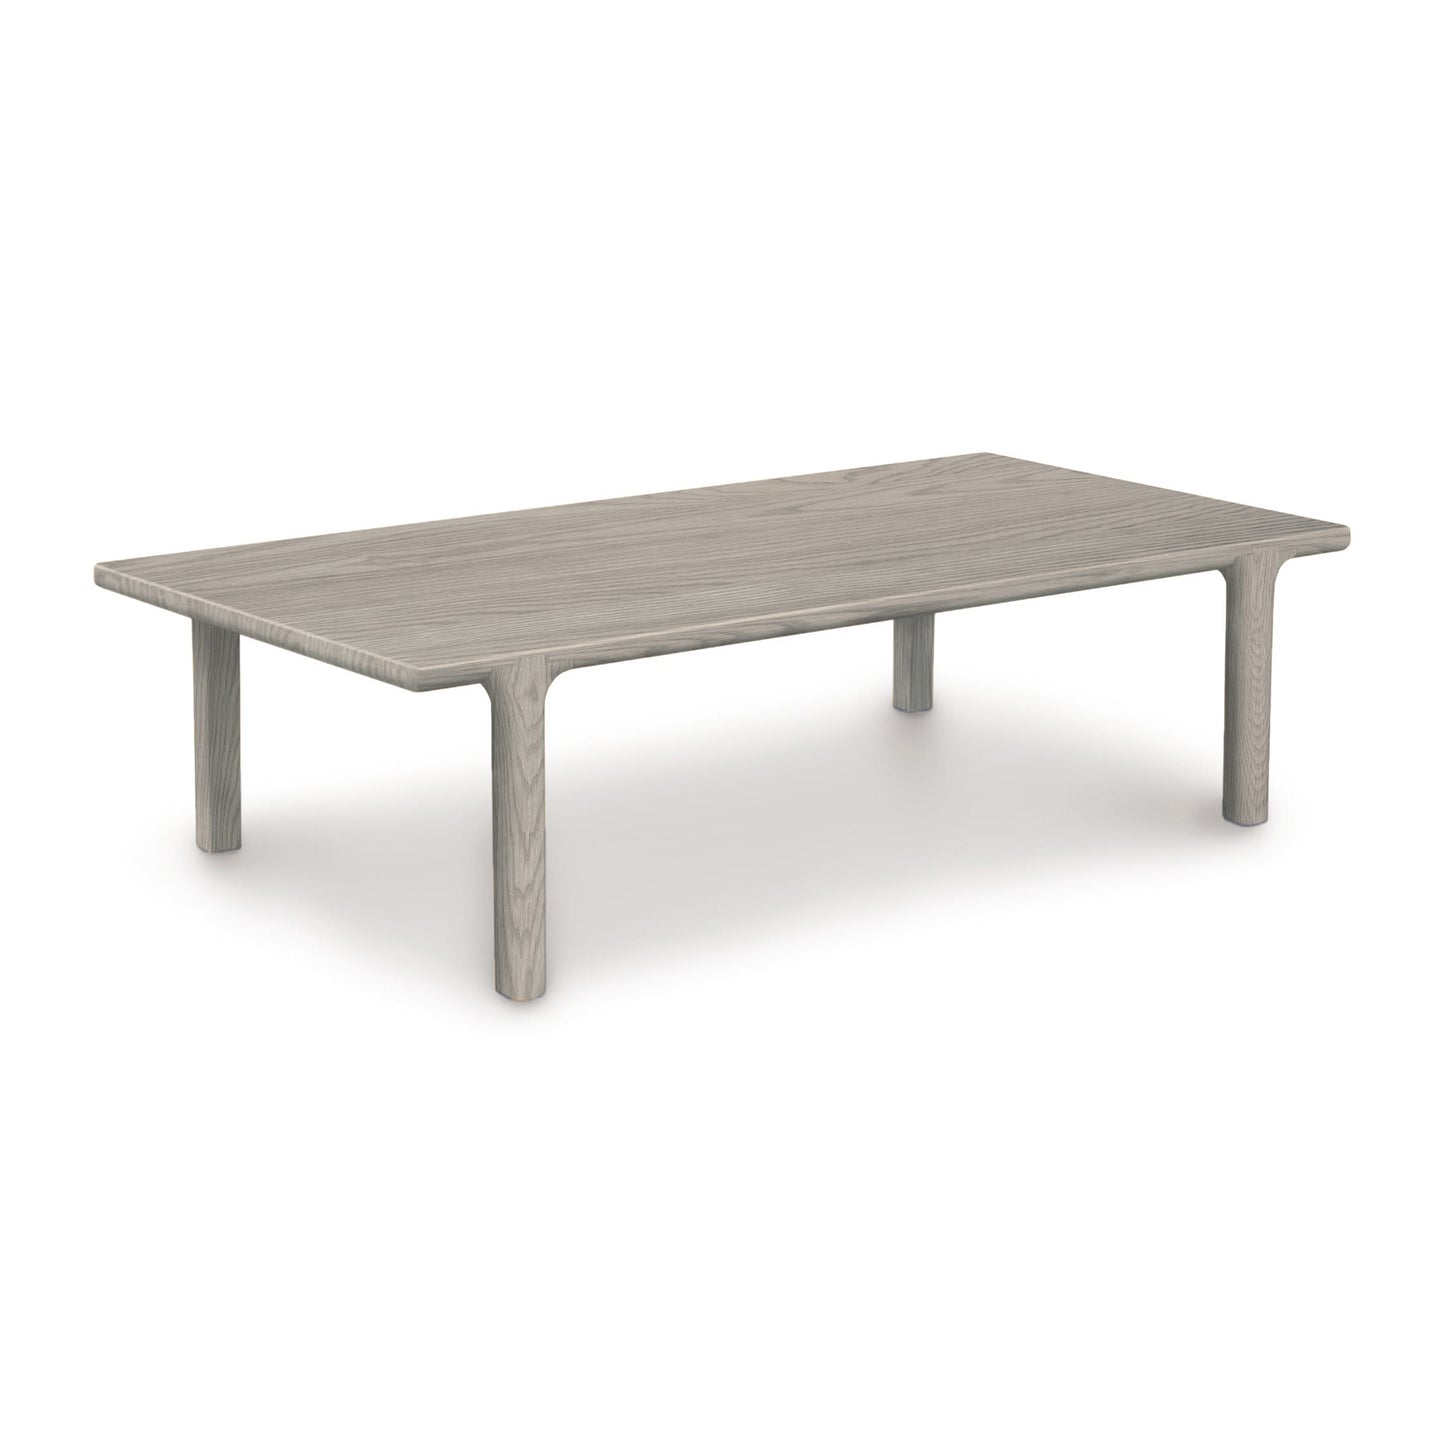 A modern rectangular wooden coffee table from the Copeland Furniture Sierra Rectangular Coffee Table range, with a simple design on a white background.